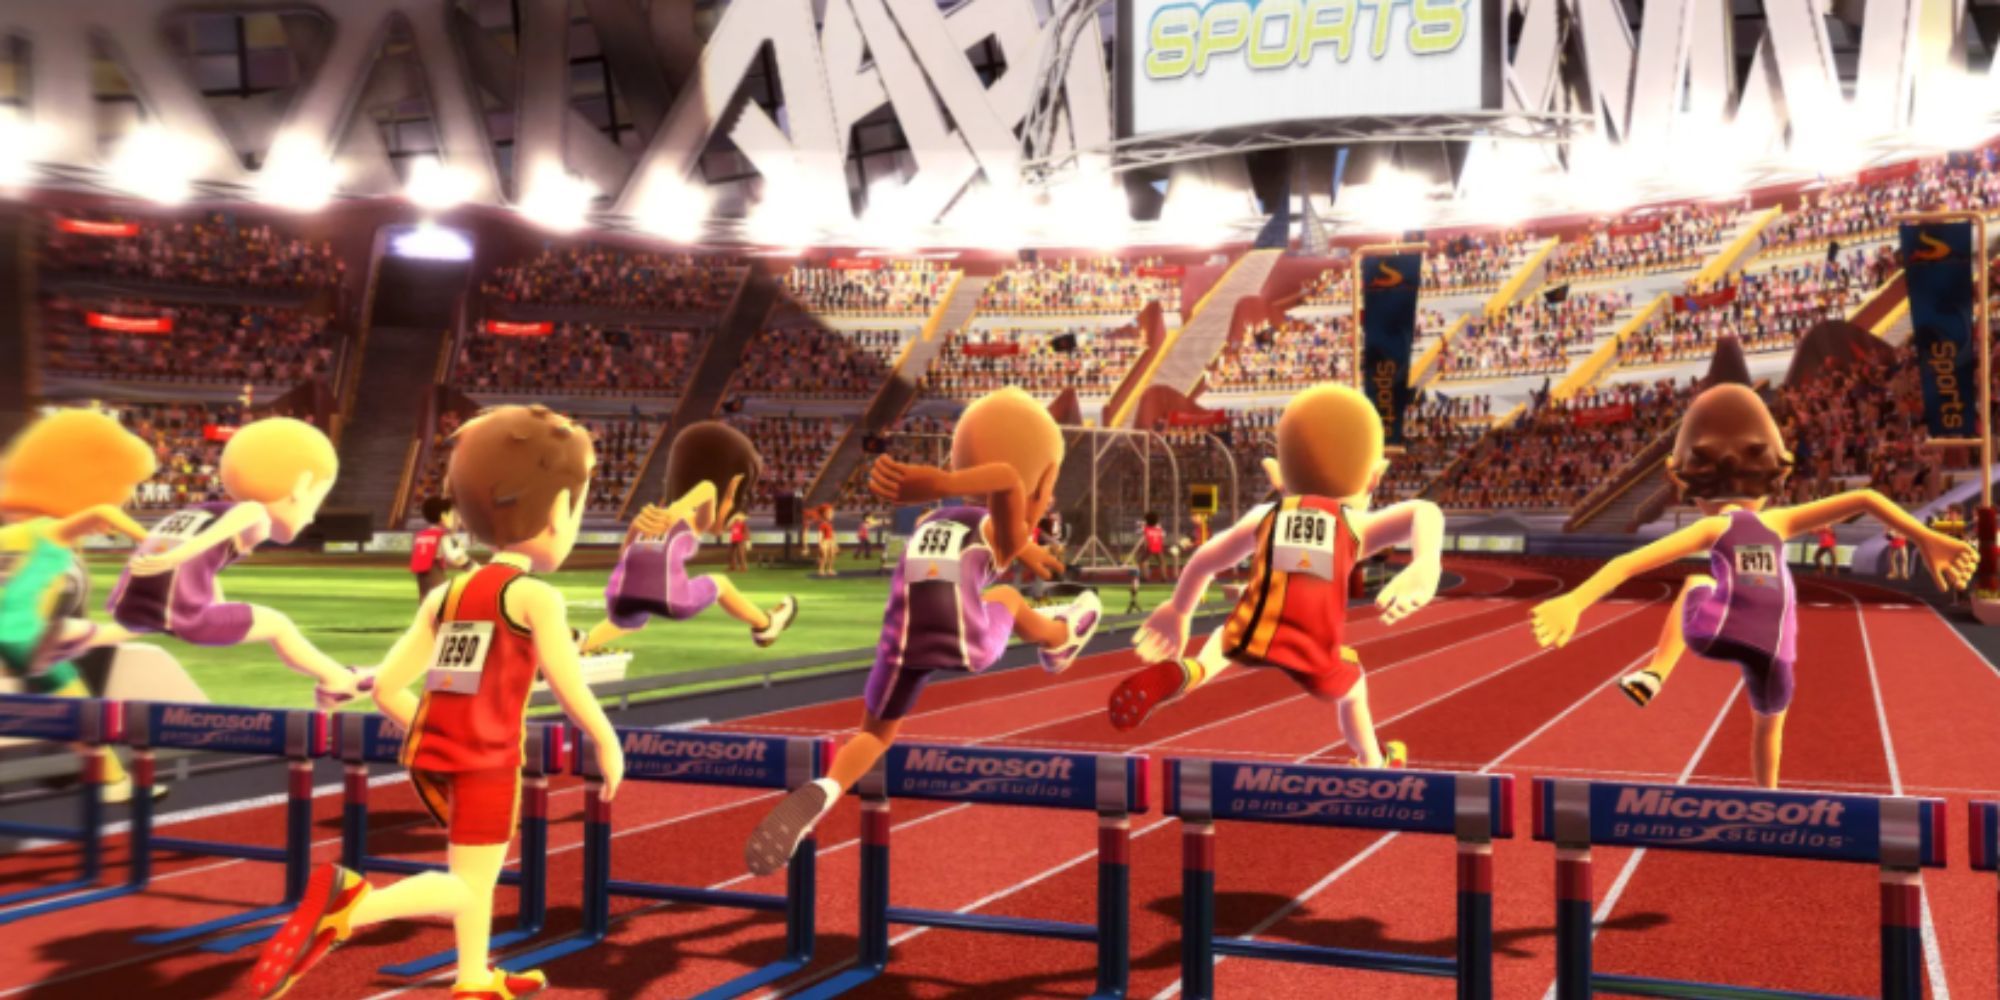 kinect_sports_race_track_with_characters